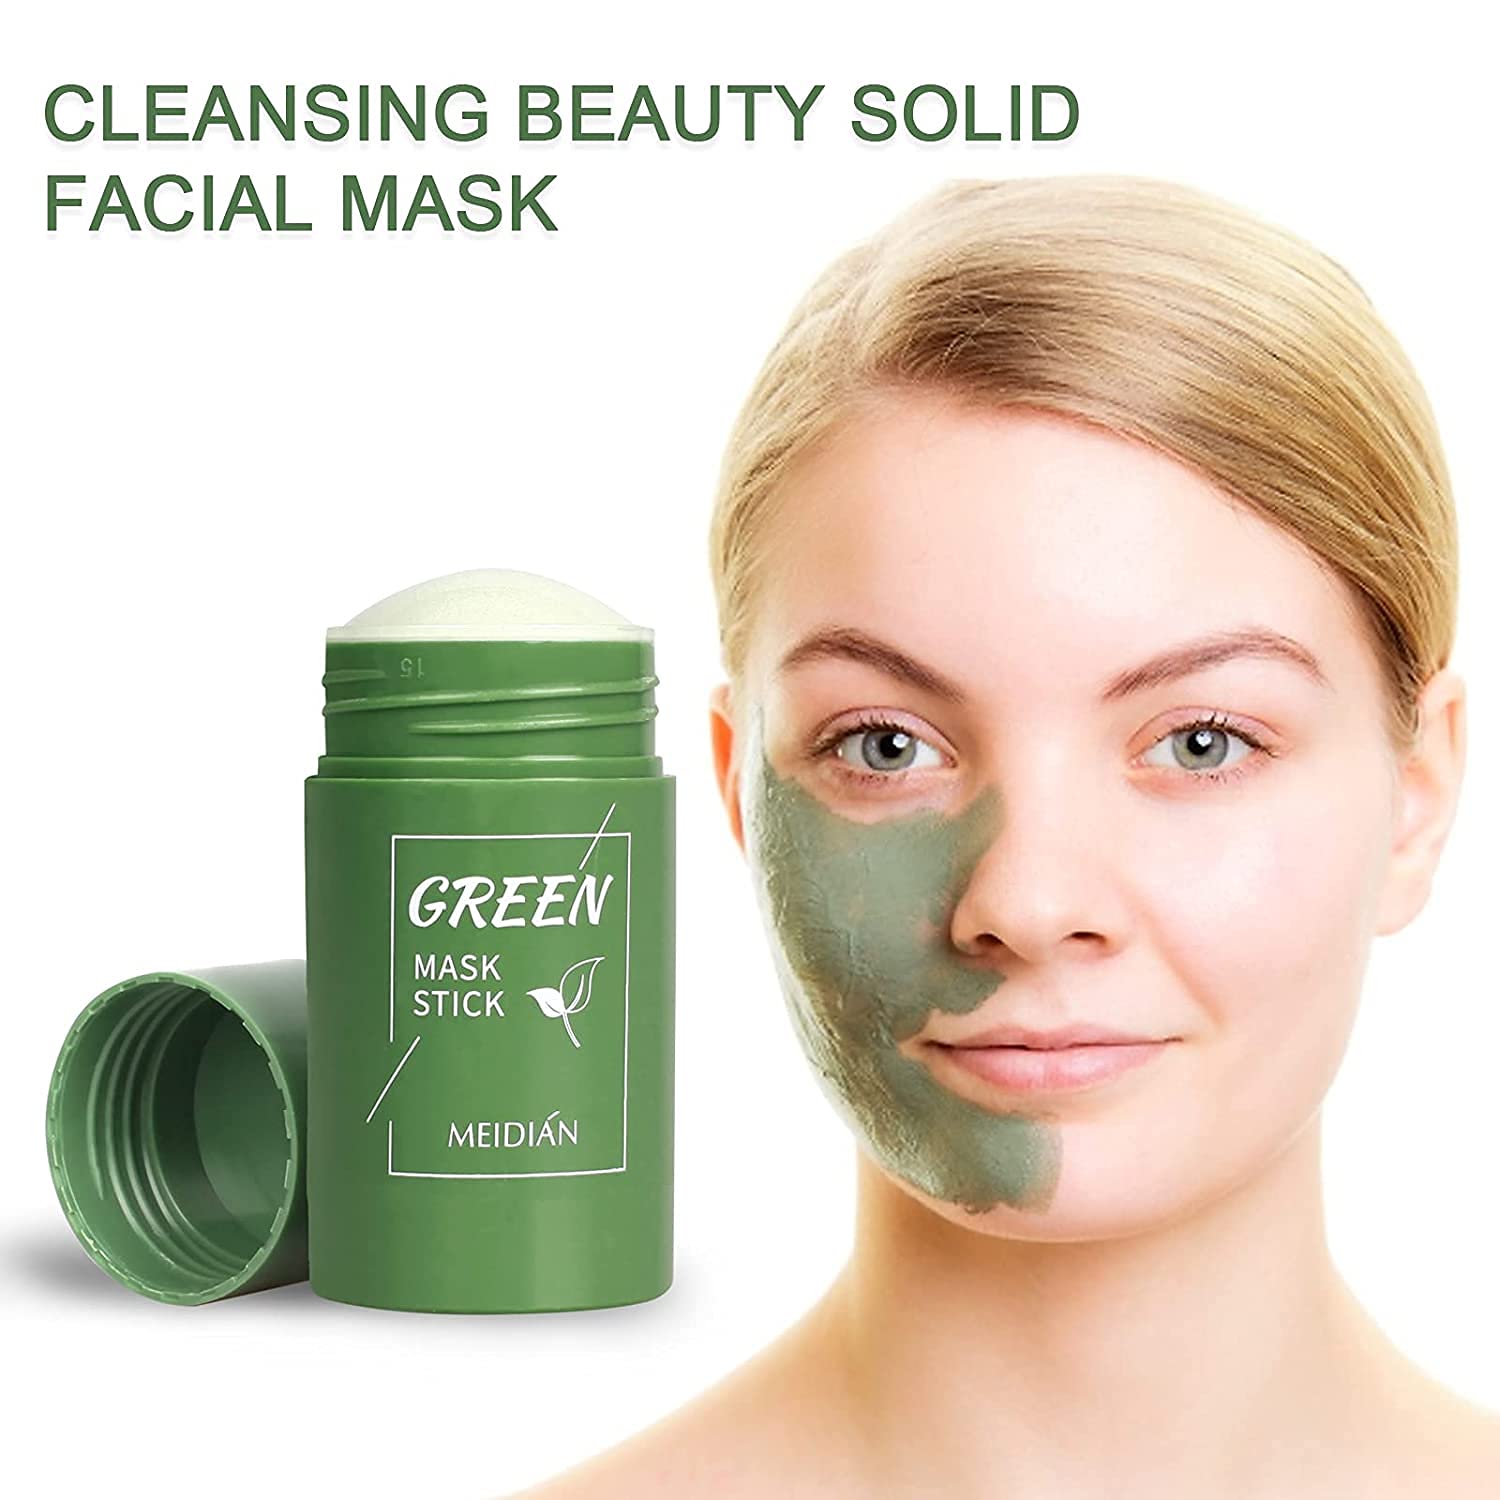 fenshine 2 Pack Green Tea Purifying Clay Stick Mask, Green Tea Cleansing Mask Blackhead Remover, Face Moisturizes Oil Control Deep Clean Pore for All Skin Types Men Women